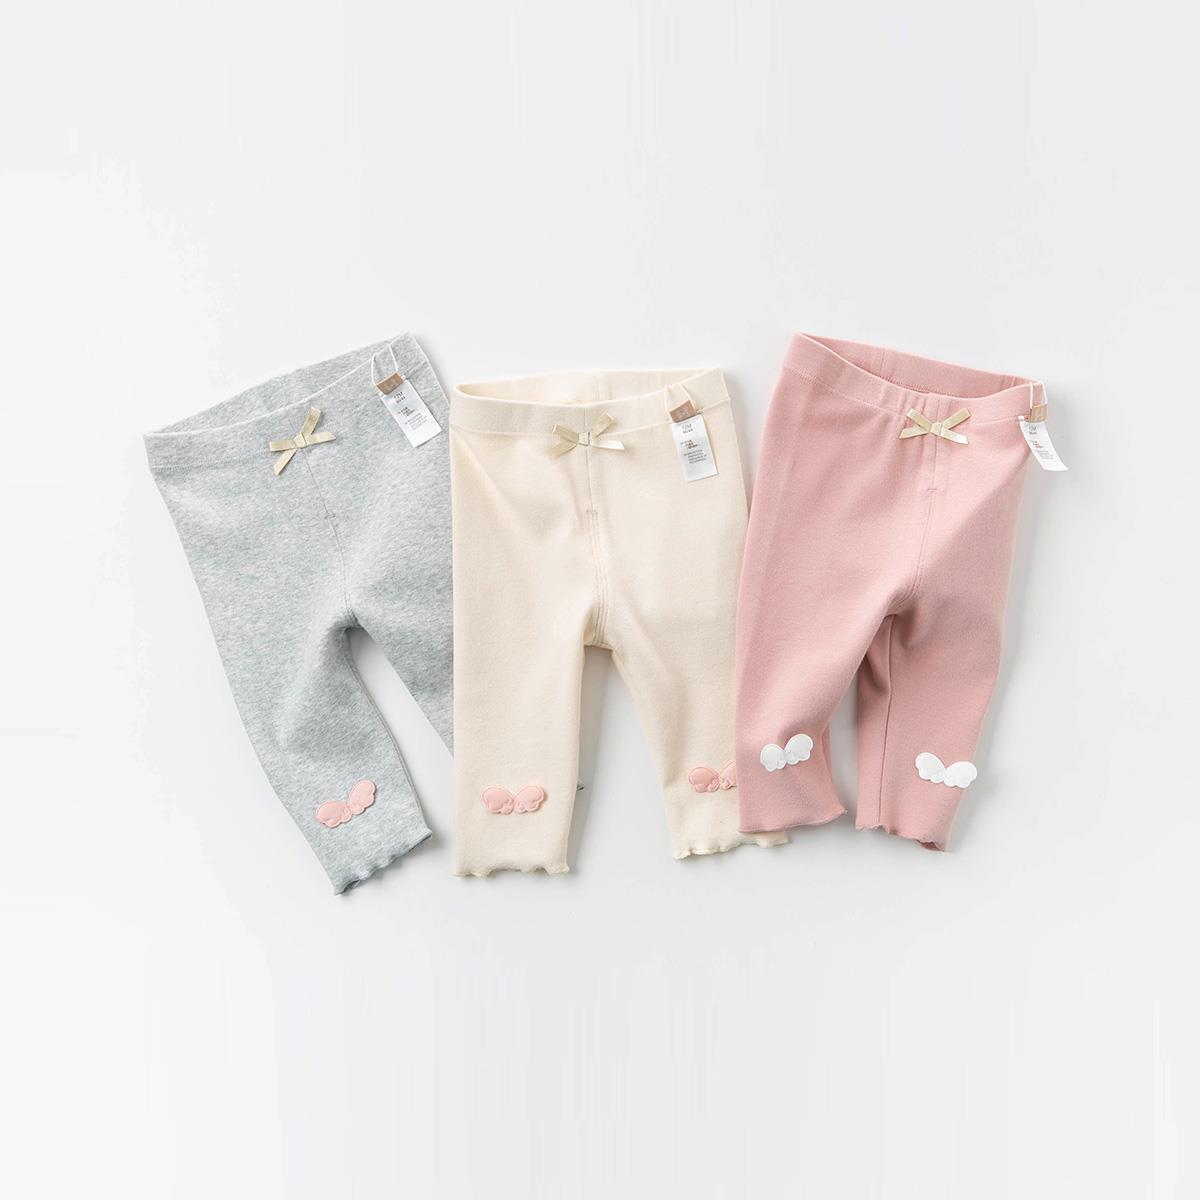 Girls' Leggings spring 2020 new spring clothes girls' spring and autumn pants wear thin foreign style baby clothes